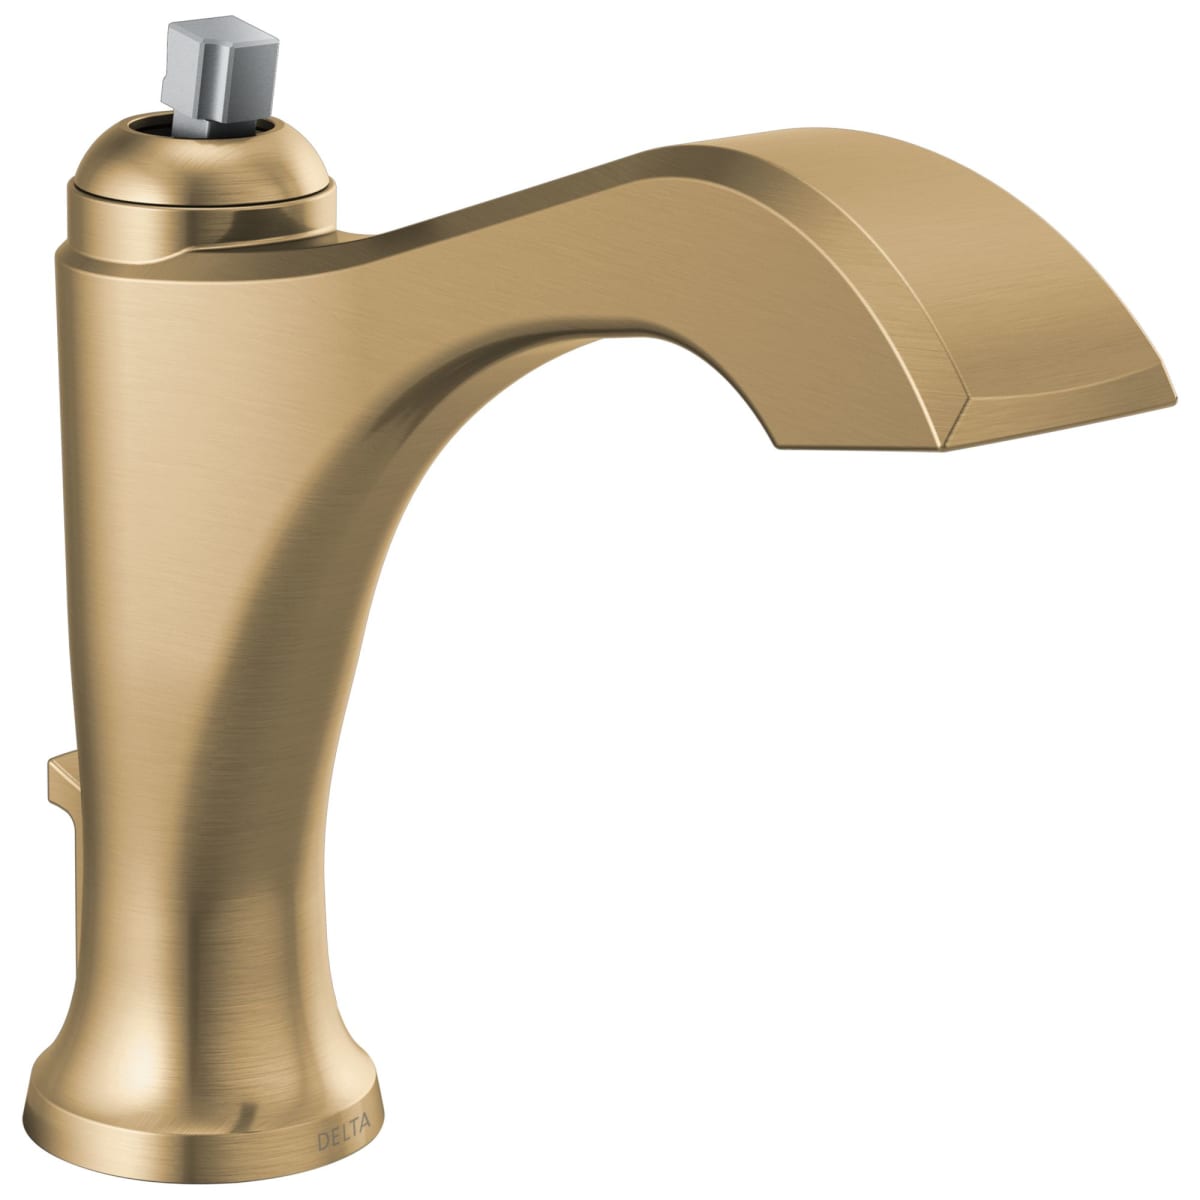 Dorval 1-Lever Hndl Lav Faucet in Champagne Bronze w/Drain